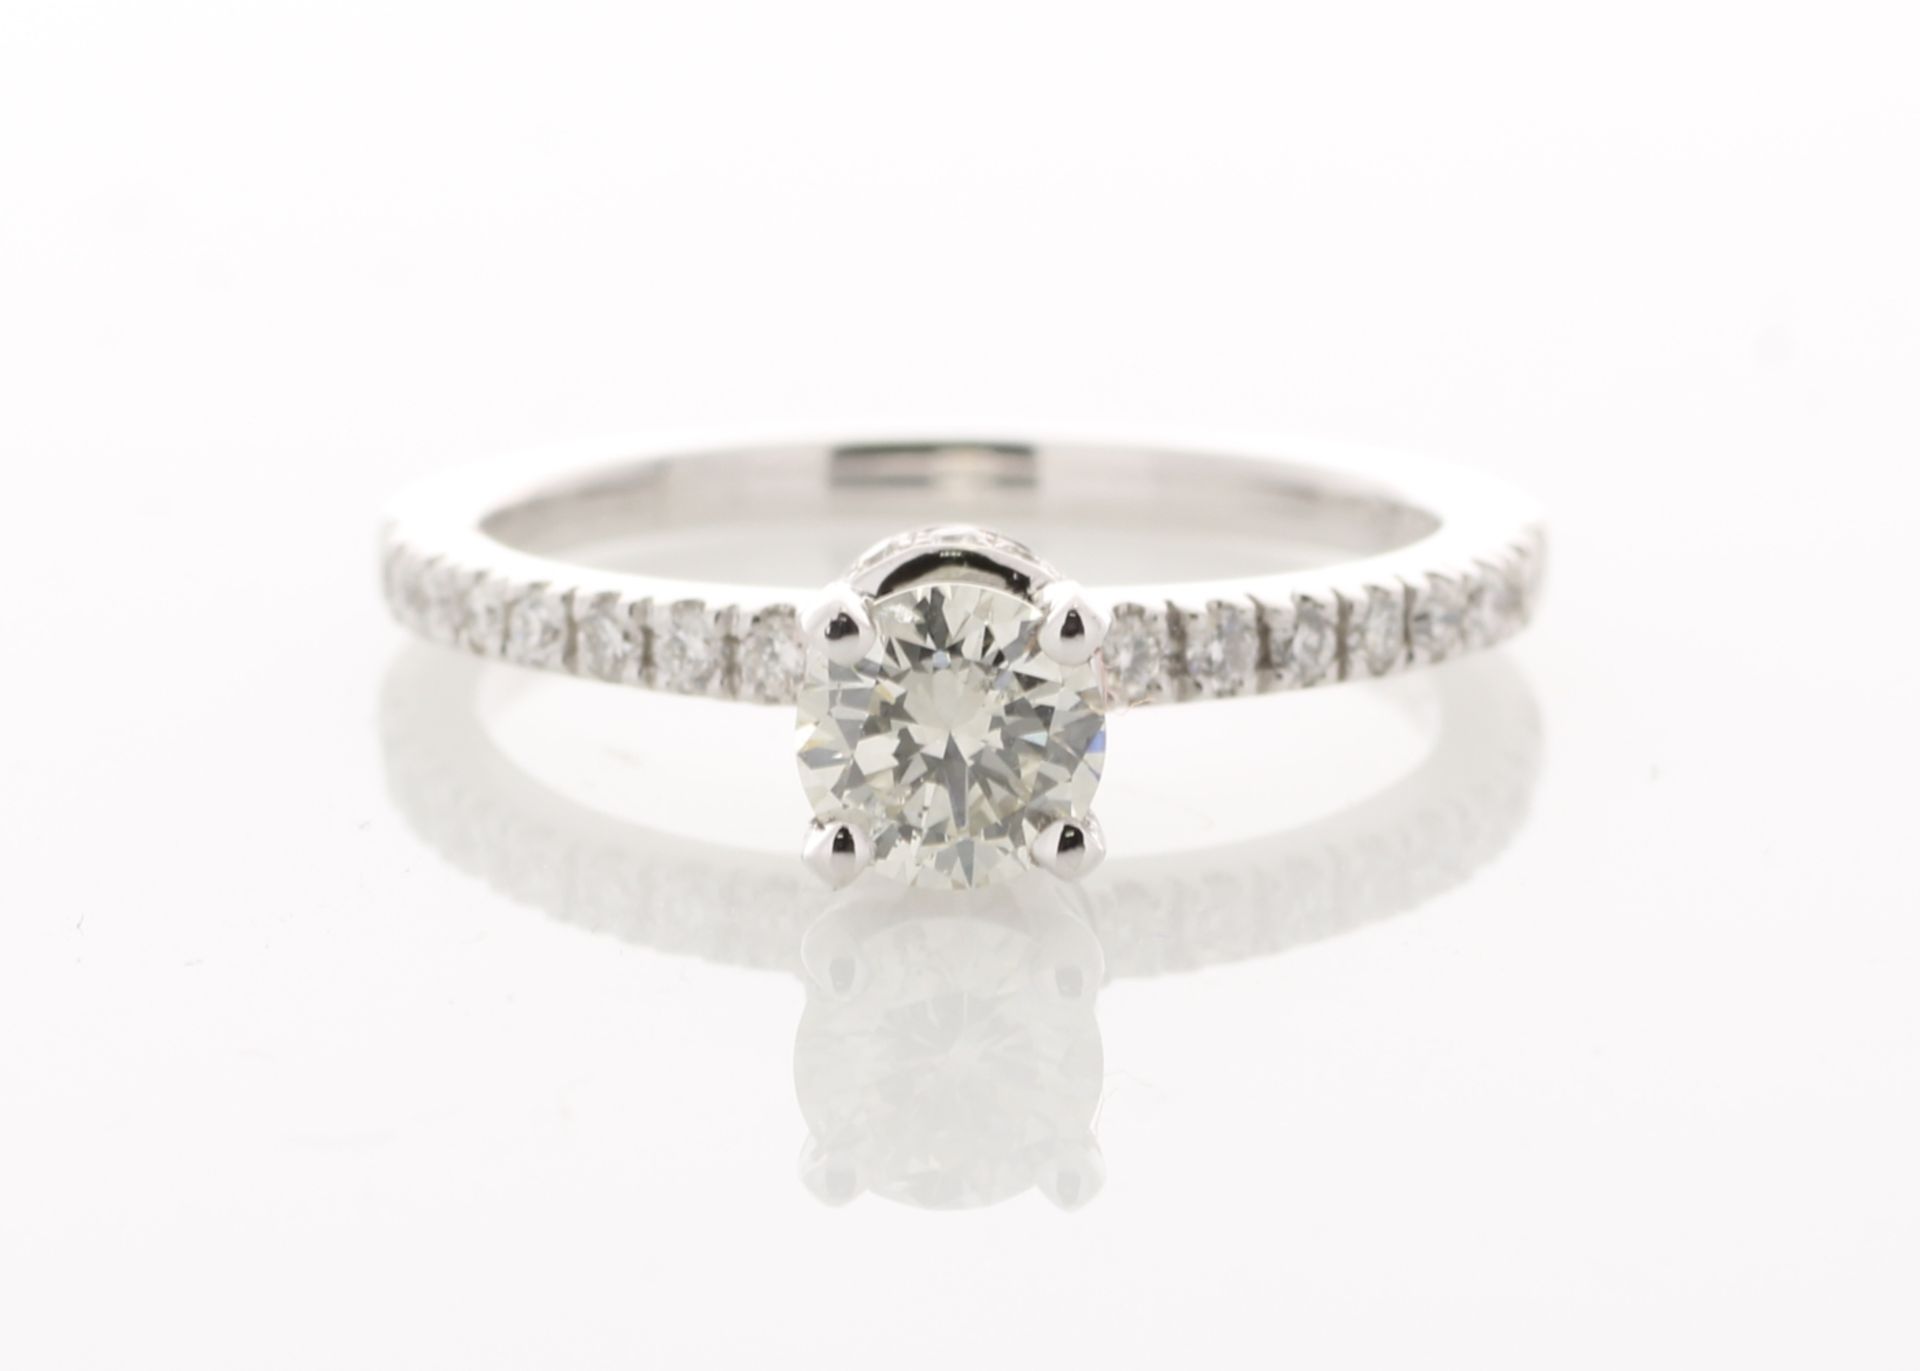 18ct White Gold Diamond Ring 0.73 Carats - Valued By IDI £6,205.00 - One natural round brilliant cut